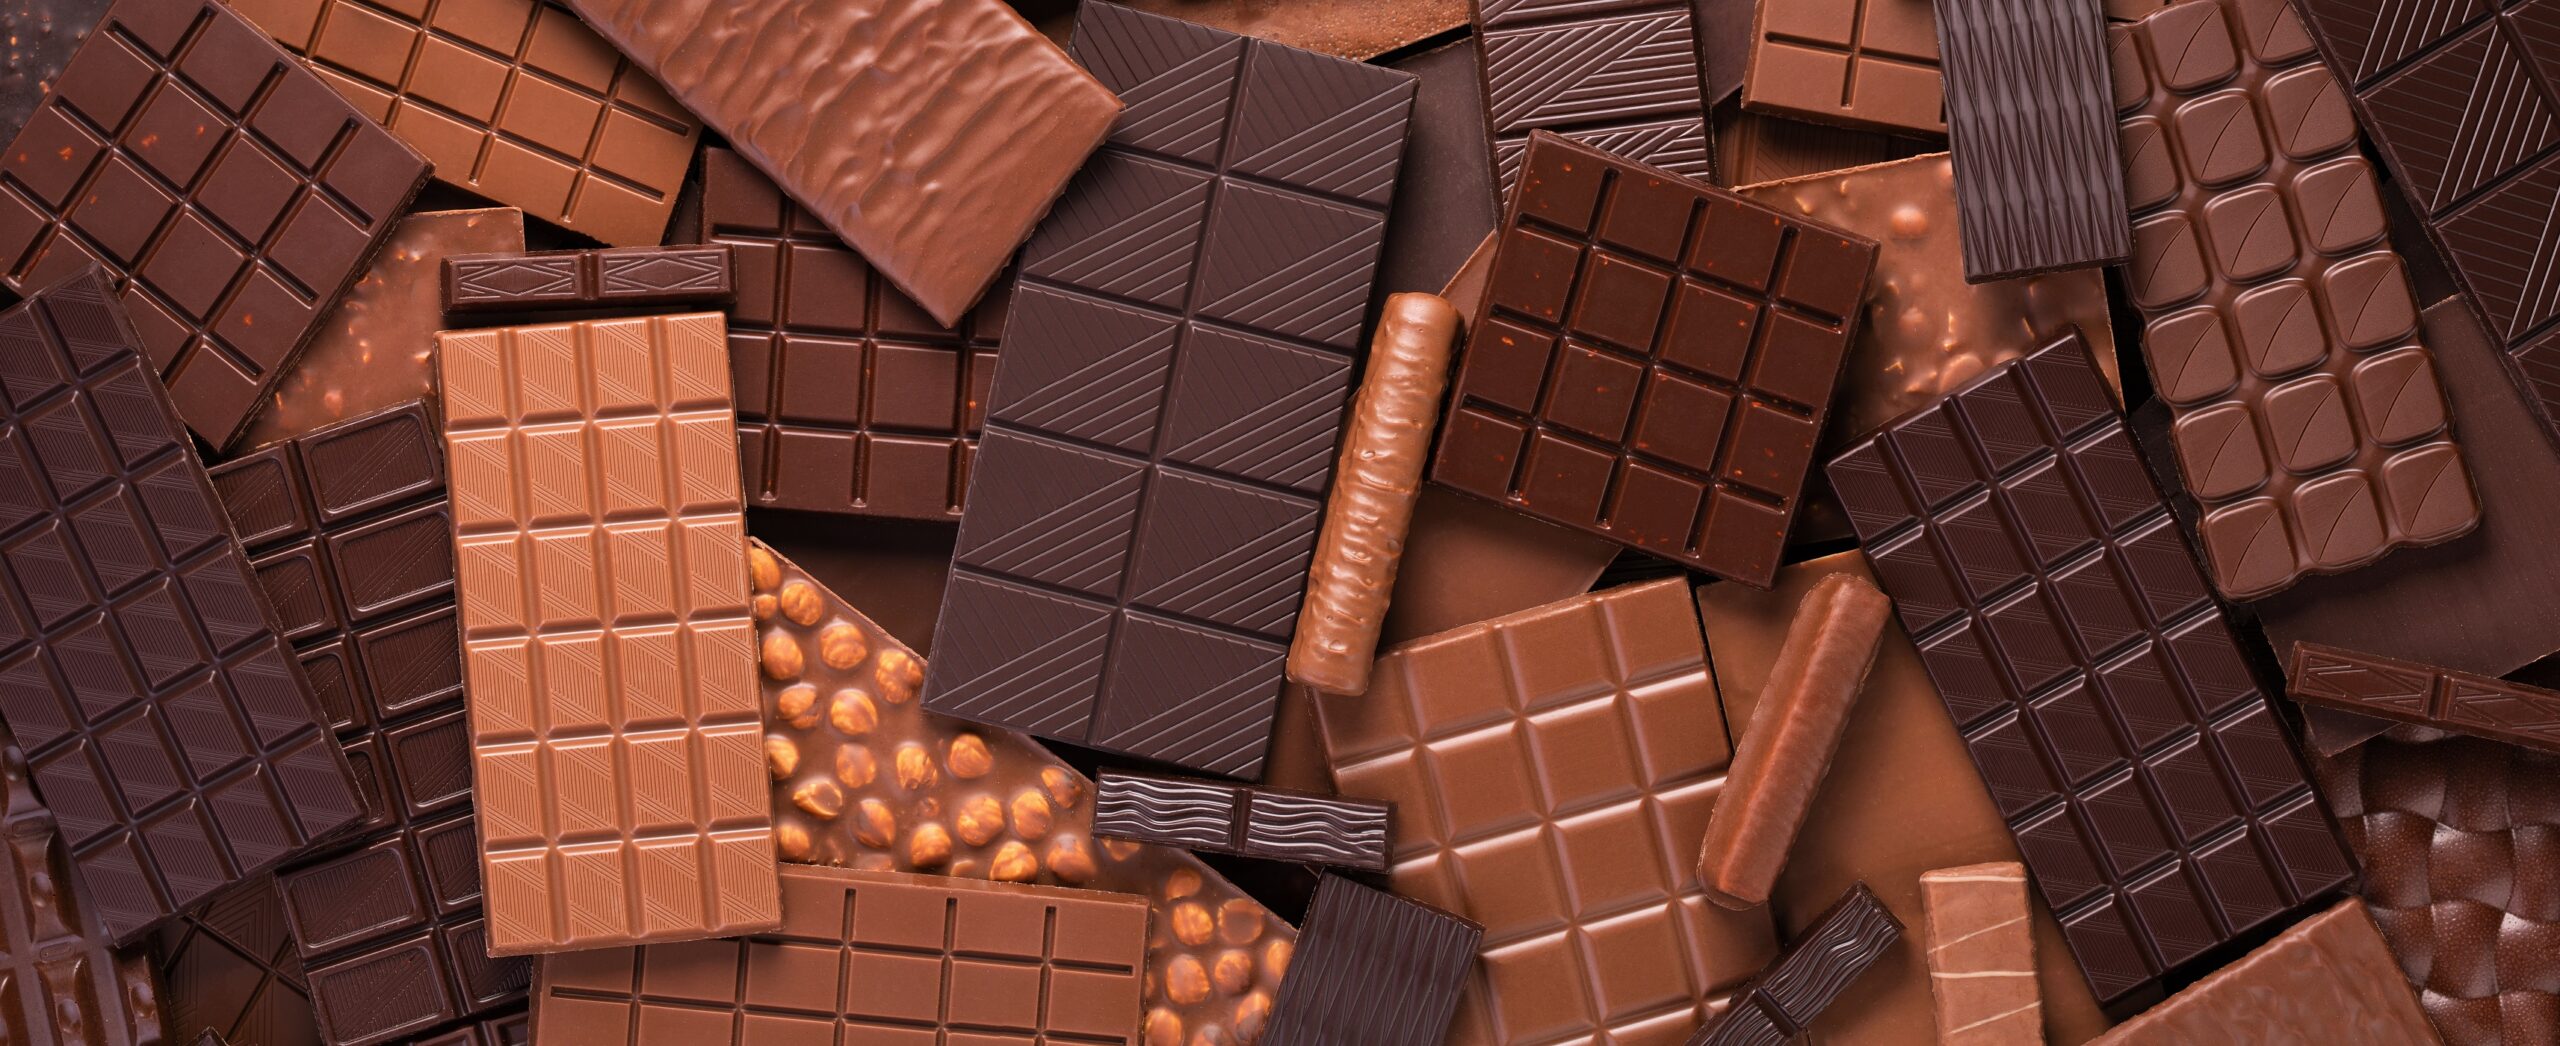 Cocoa: Is chocolate healthy?